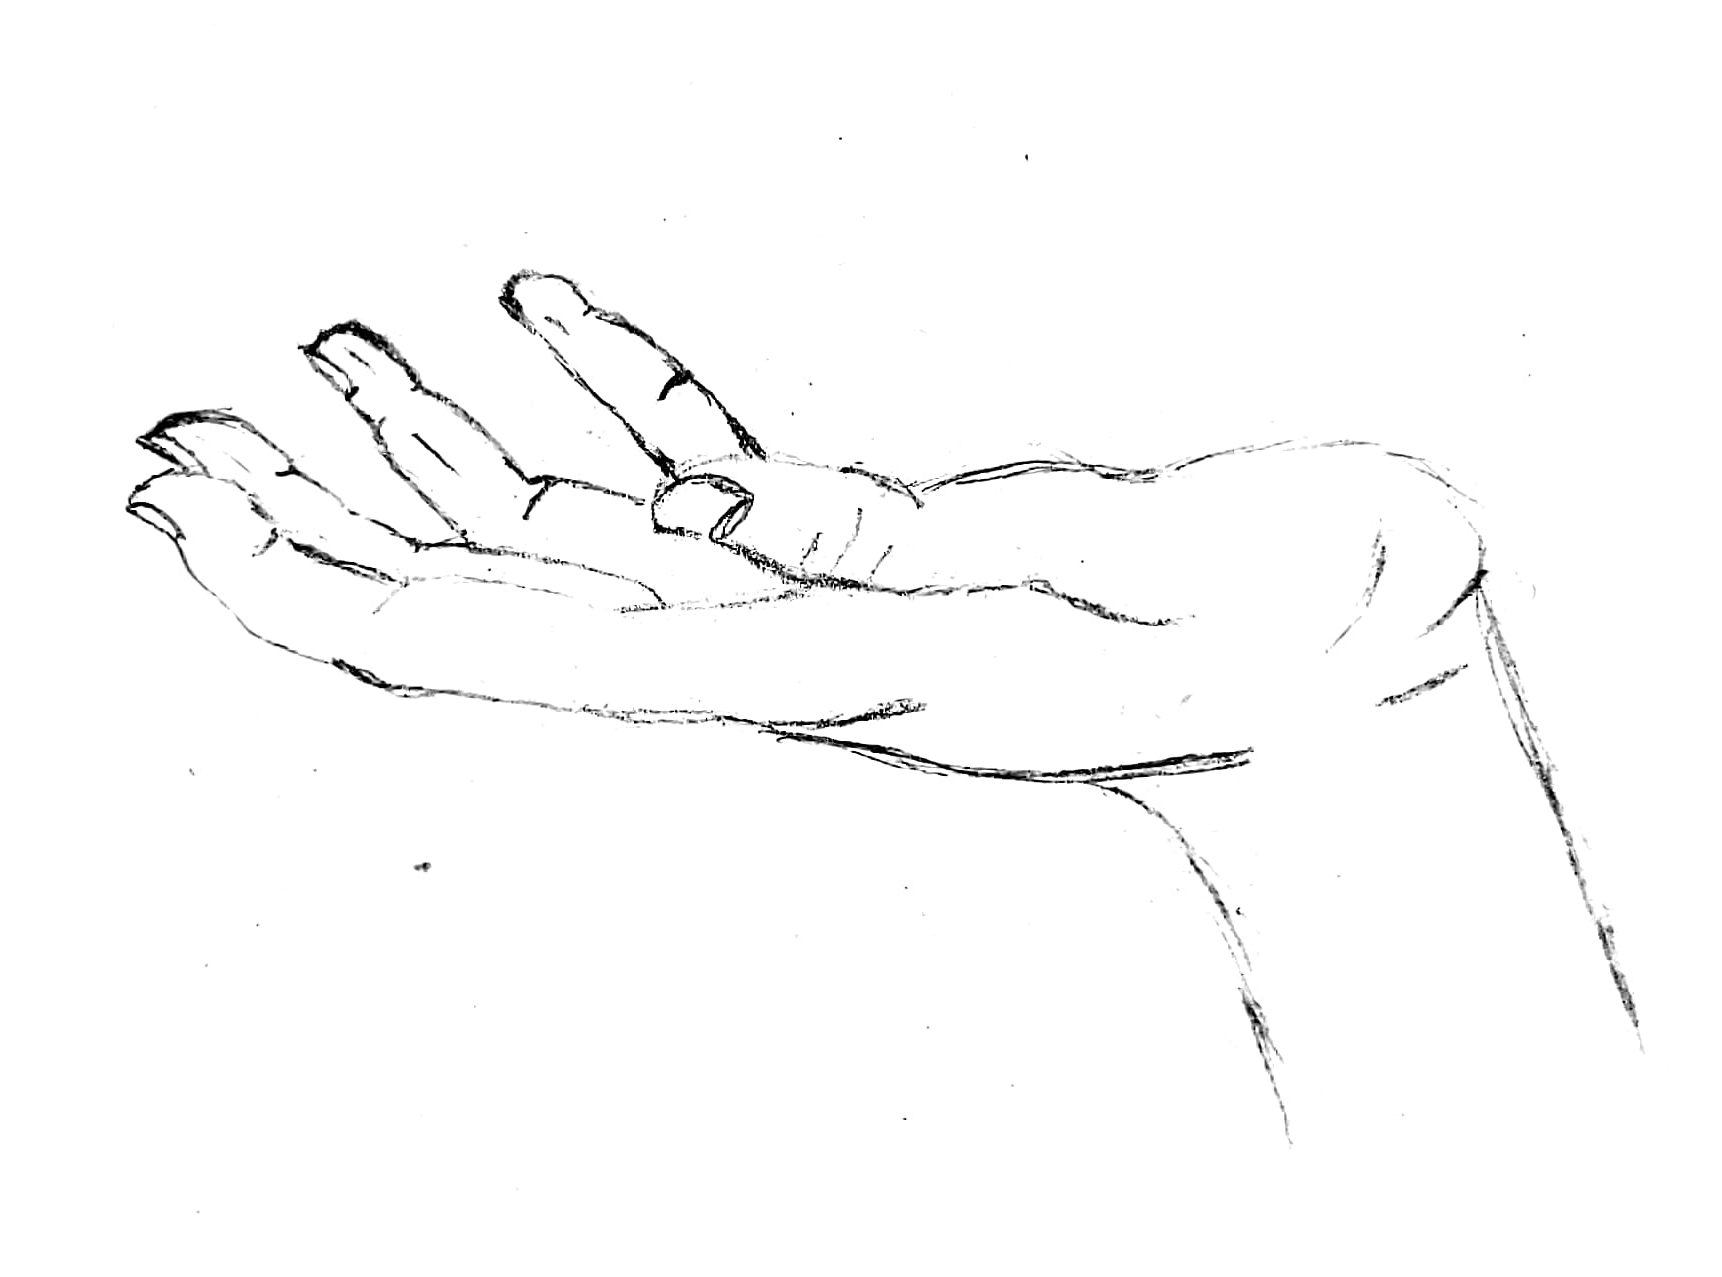 Sketch of an open hand, palm facing up